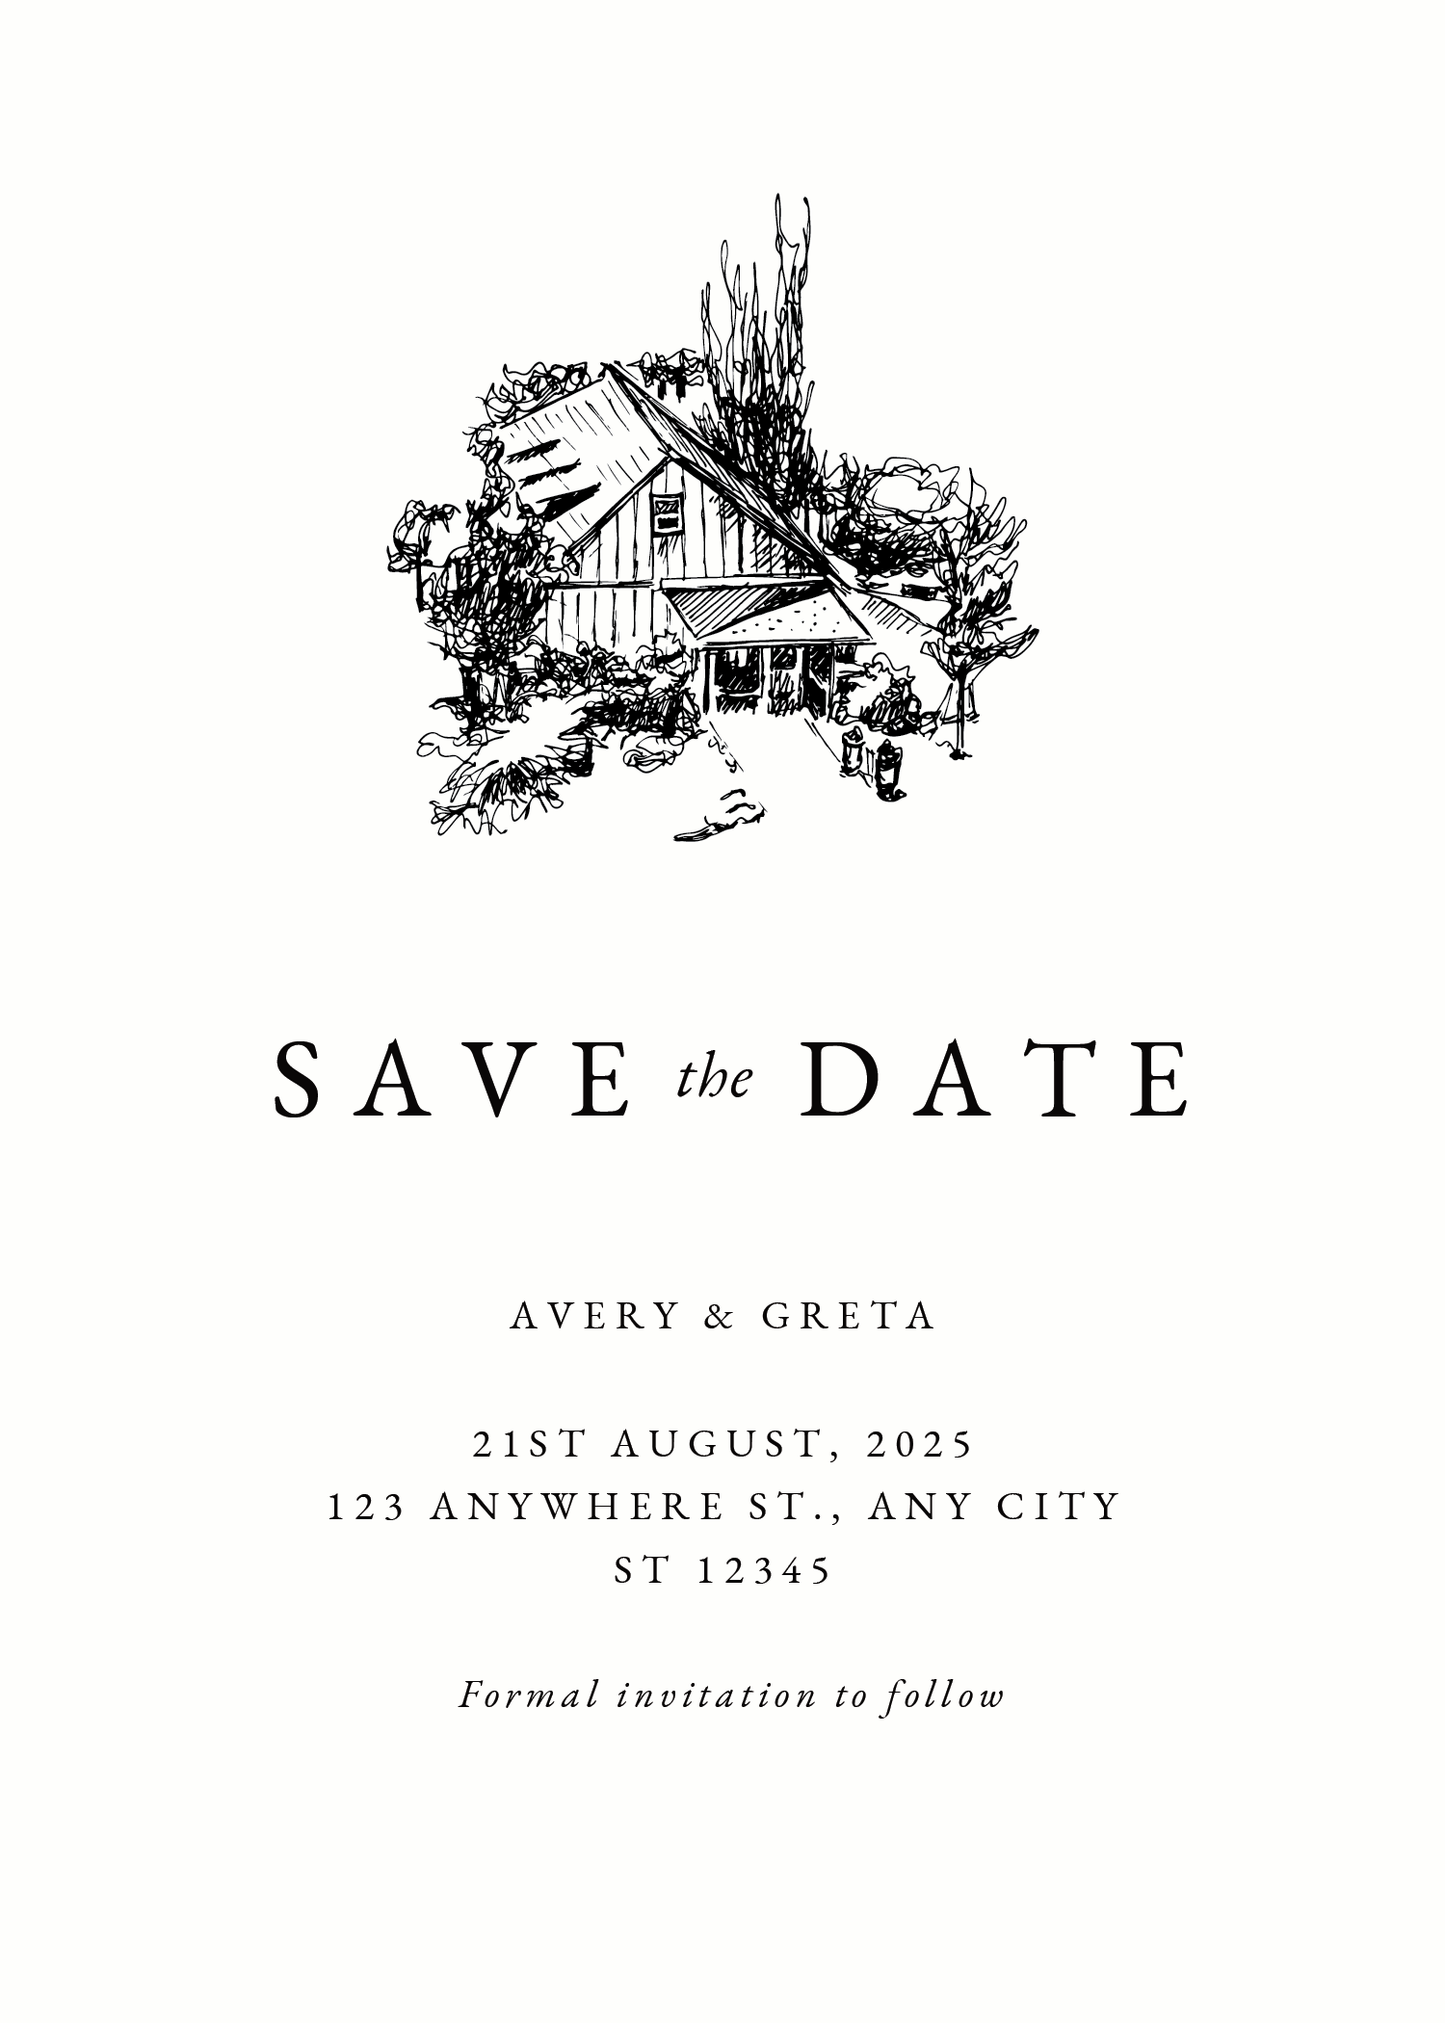 Wedding Venue custom illustration for stationery: invitations, save the date, table signs, location maps